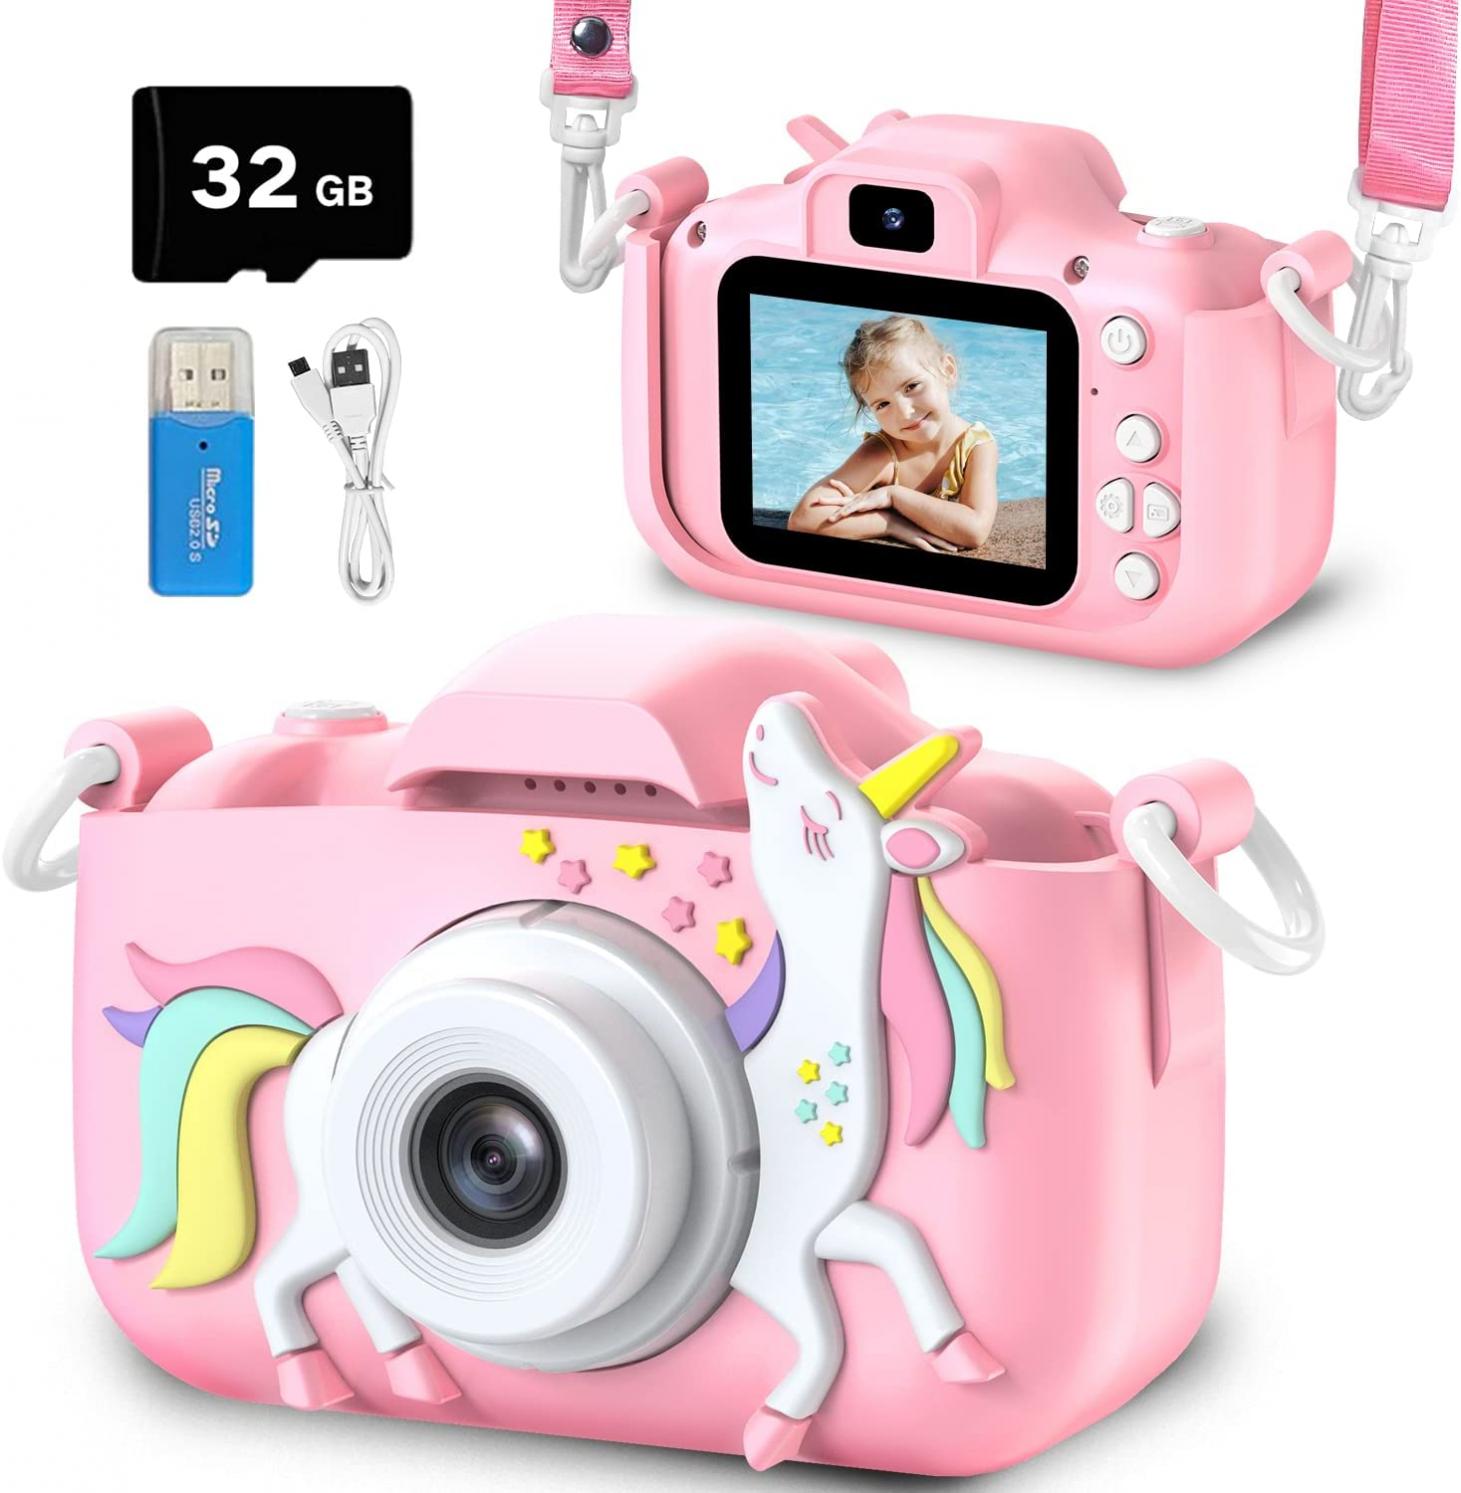 Goopow Kids Camera Toys for 3-8 Year Old Girls,Children Digital Video Camcorder Camera with Unicorn Soft Silicone Cover, Best Christmas Birthday Festival Gift for Kids - 32G SD Card Included